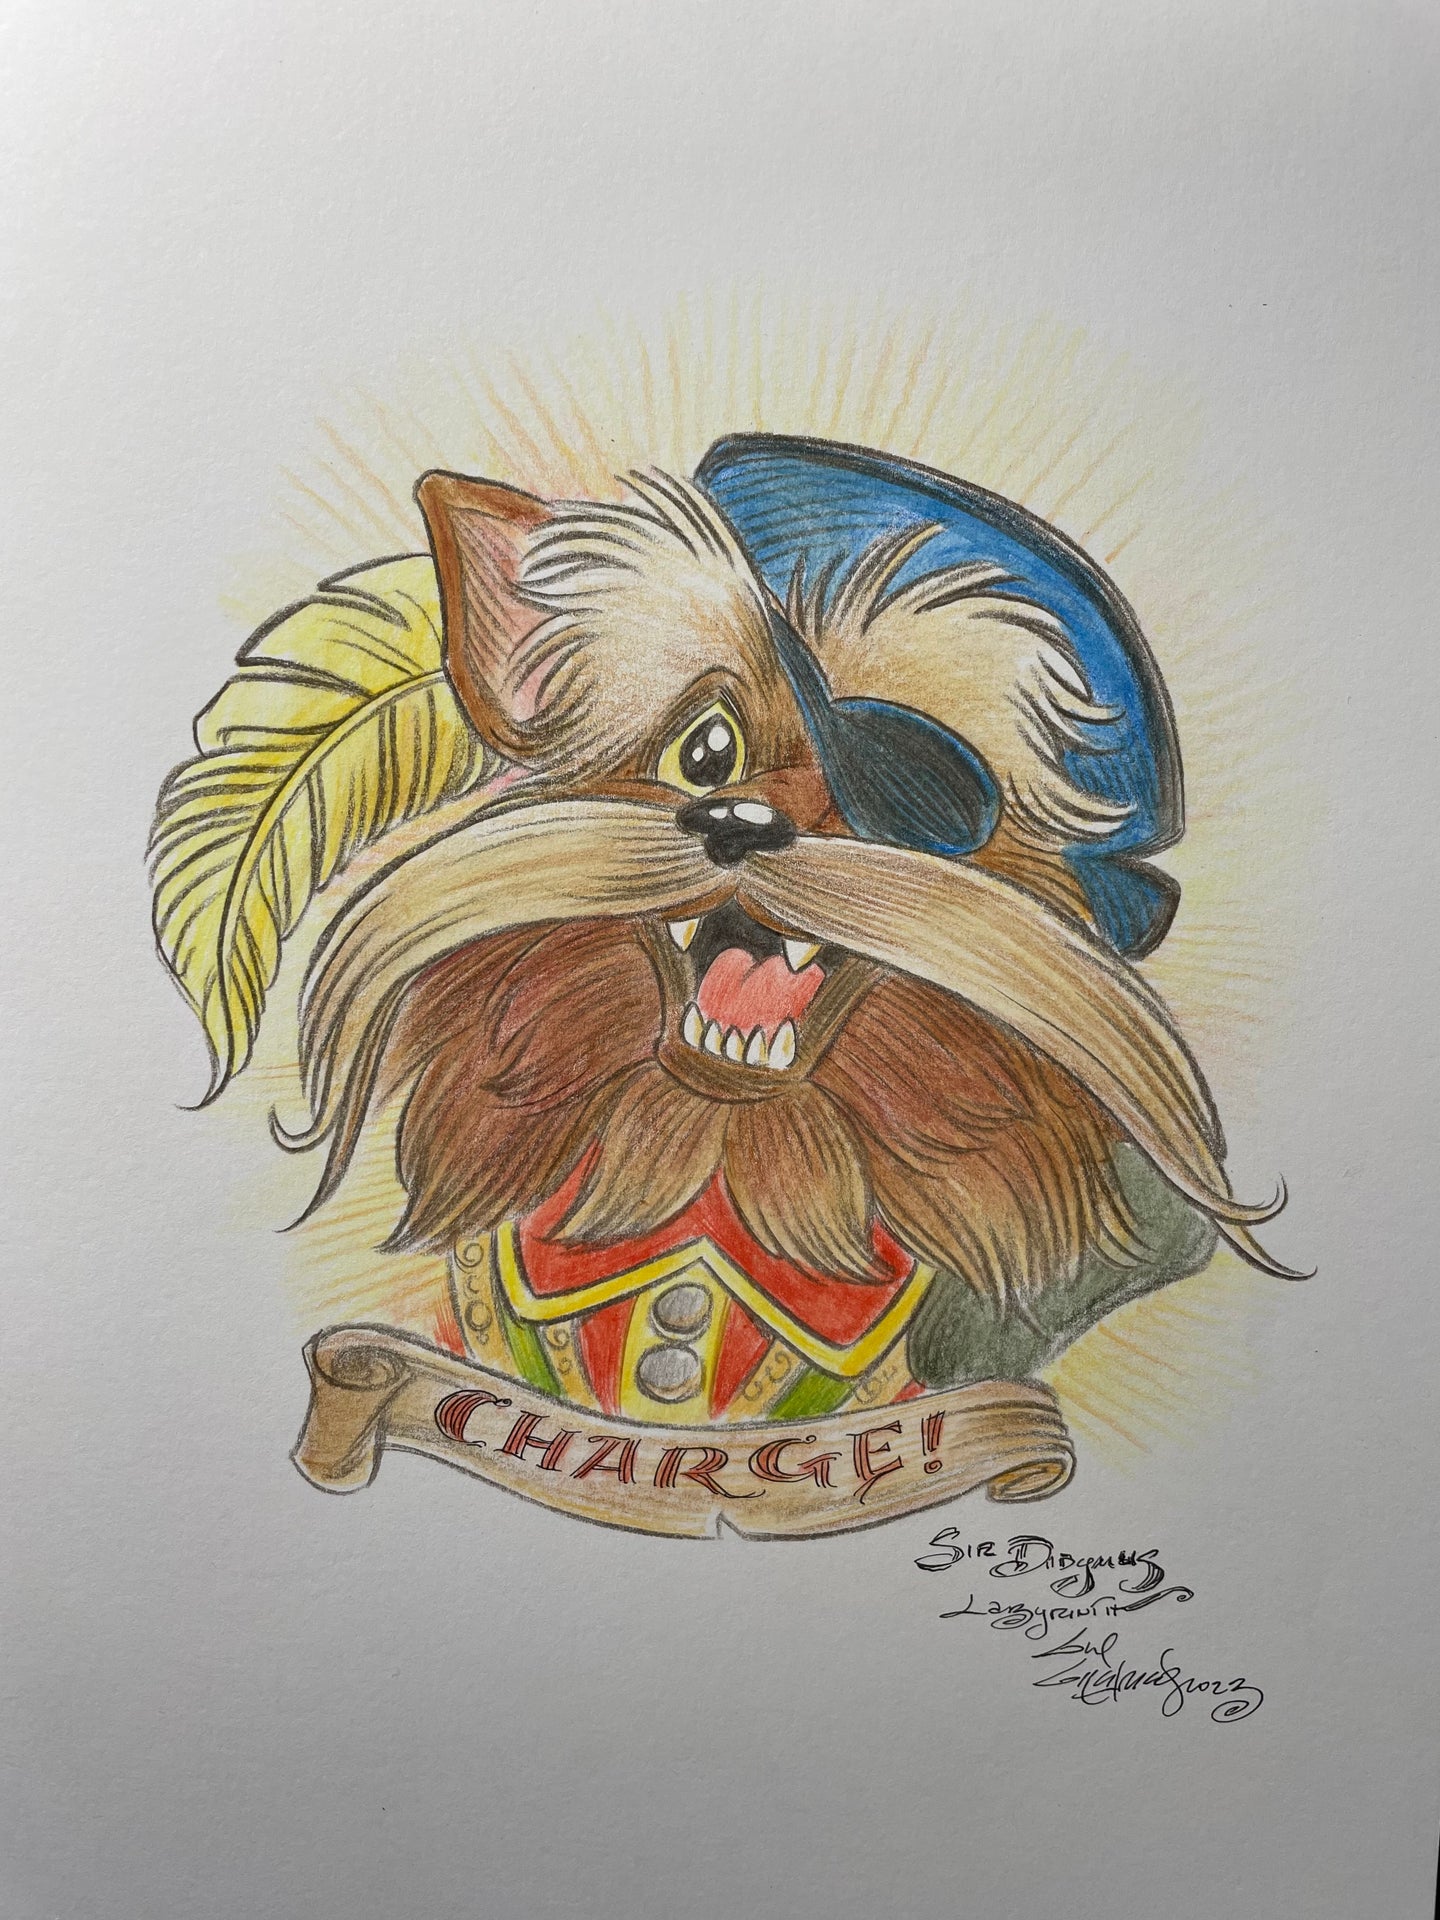 Sir Didymus “Charge!” Original Art 8.5x11 Sketch - Created by Guy Gilchrist